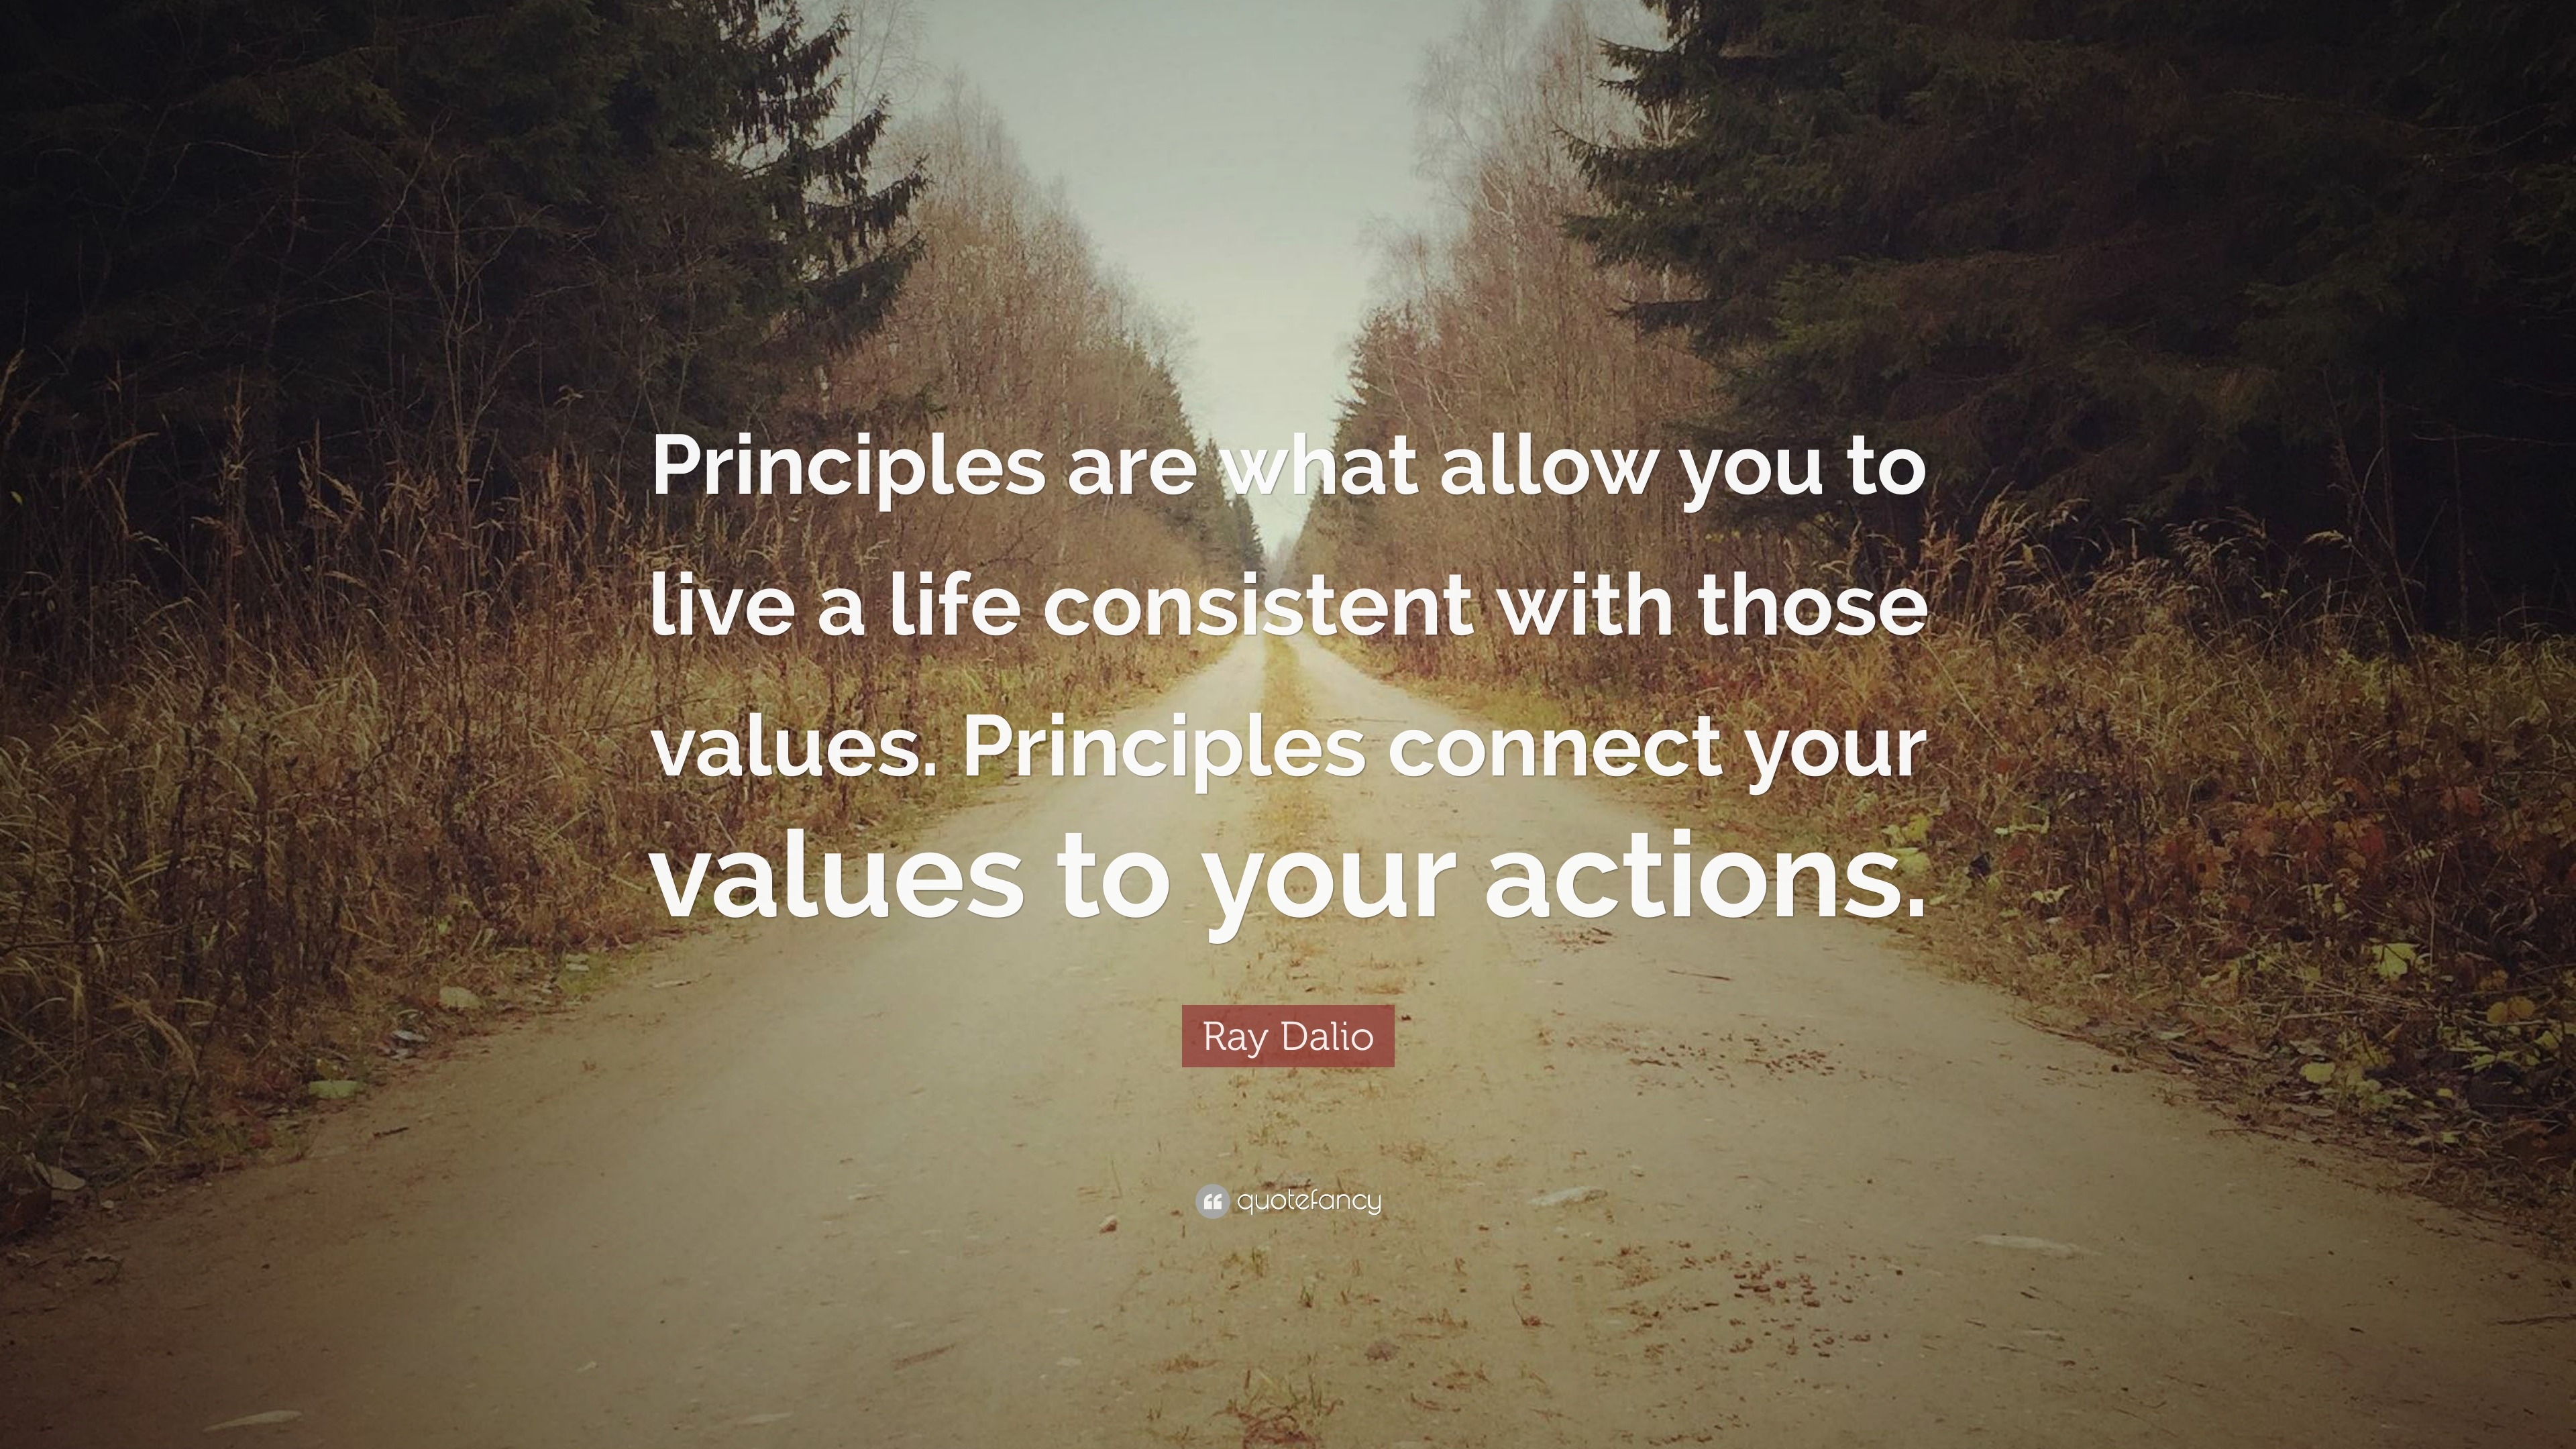 609352 Ray Dalio Quote Principles are what allow you to live a life